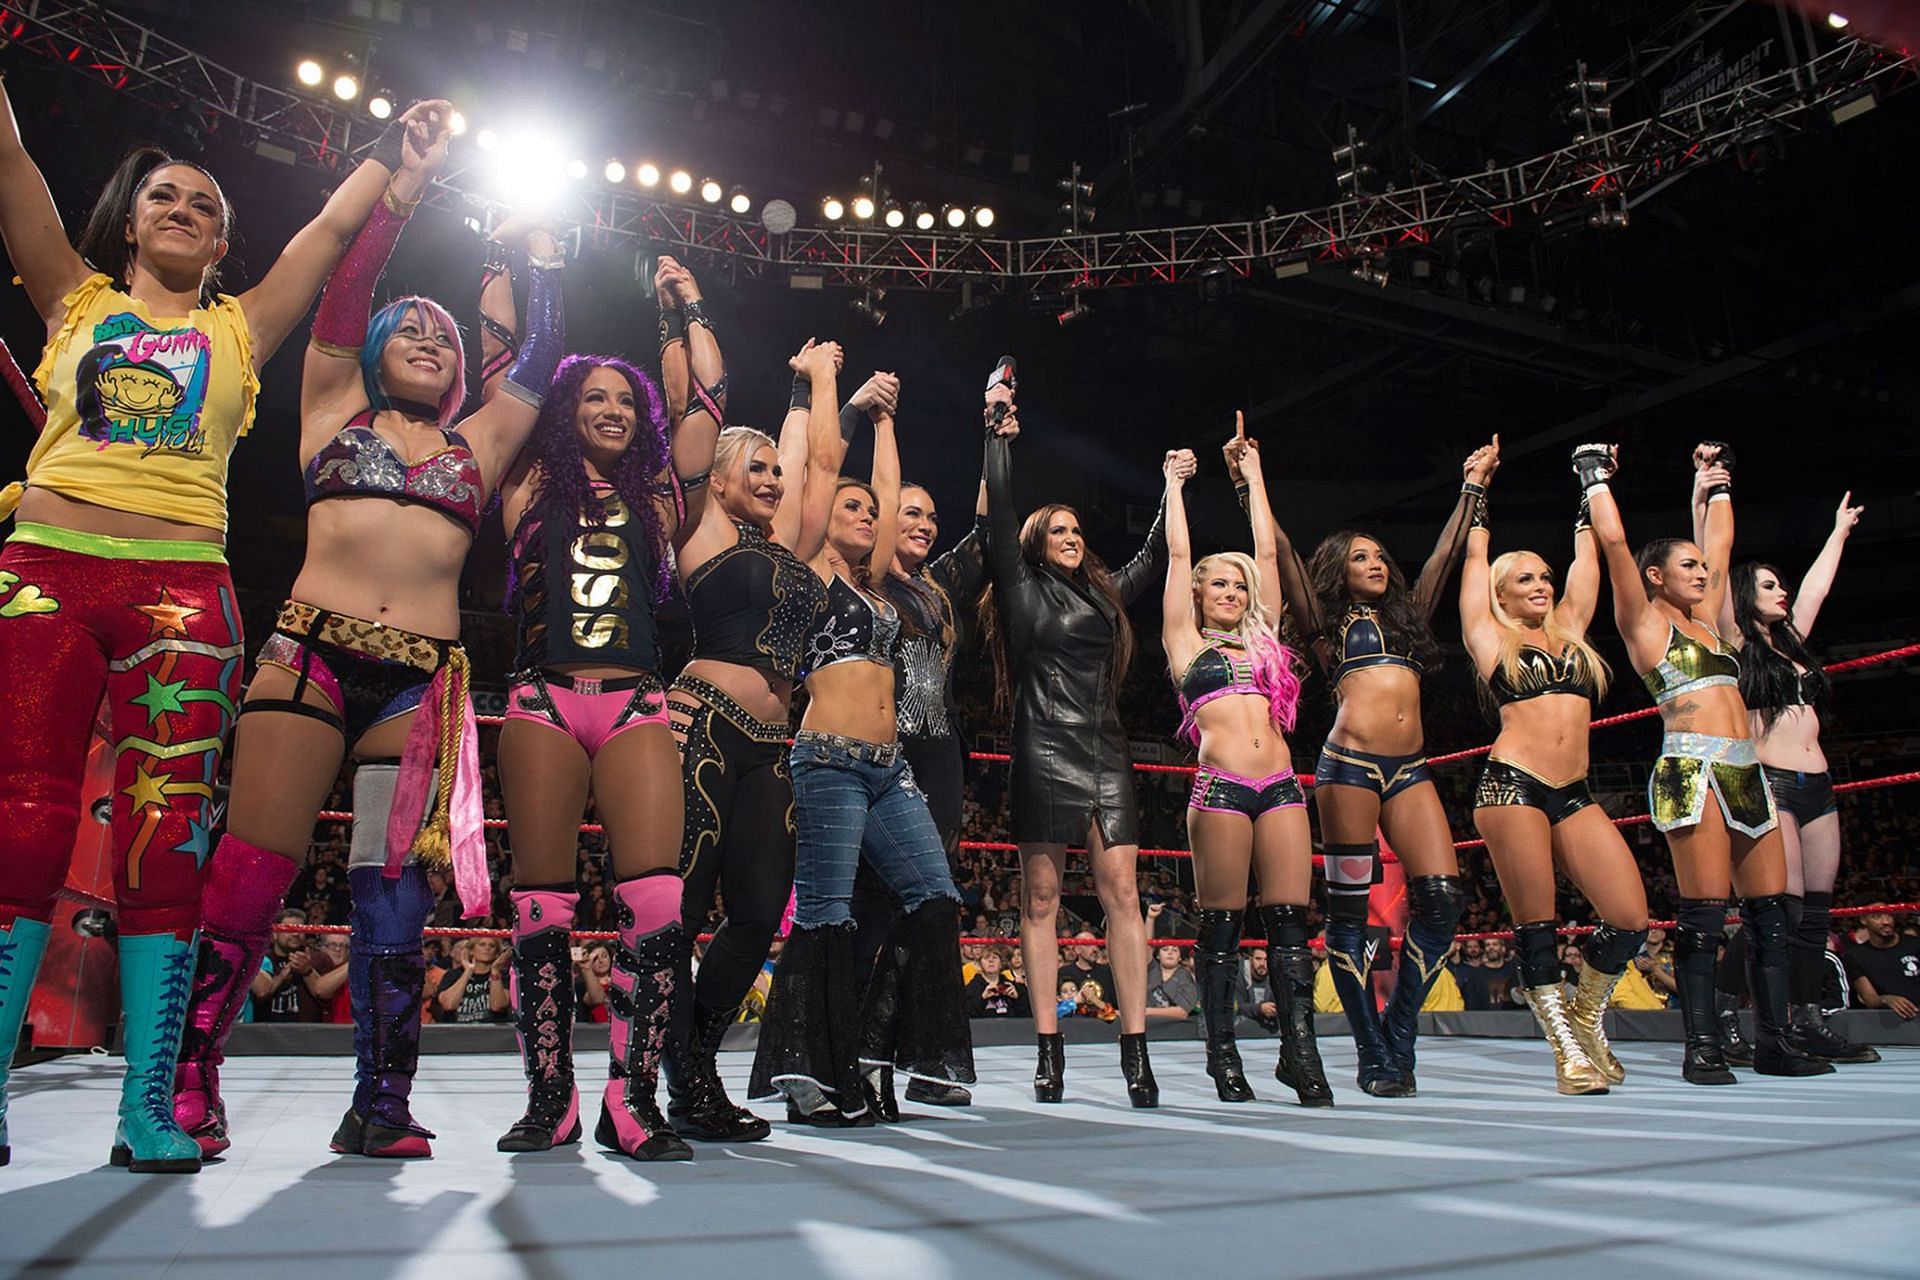 The women&#039;s division must continue to stand united to be on par with the men&#039;s division in WWE.